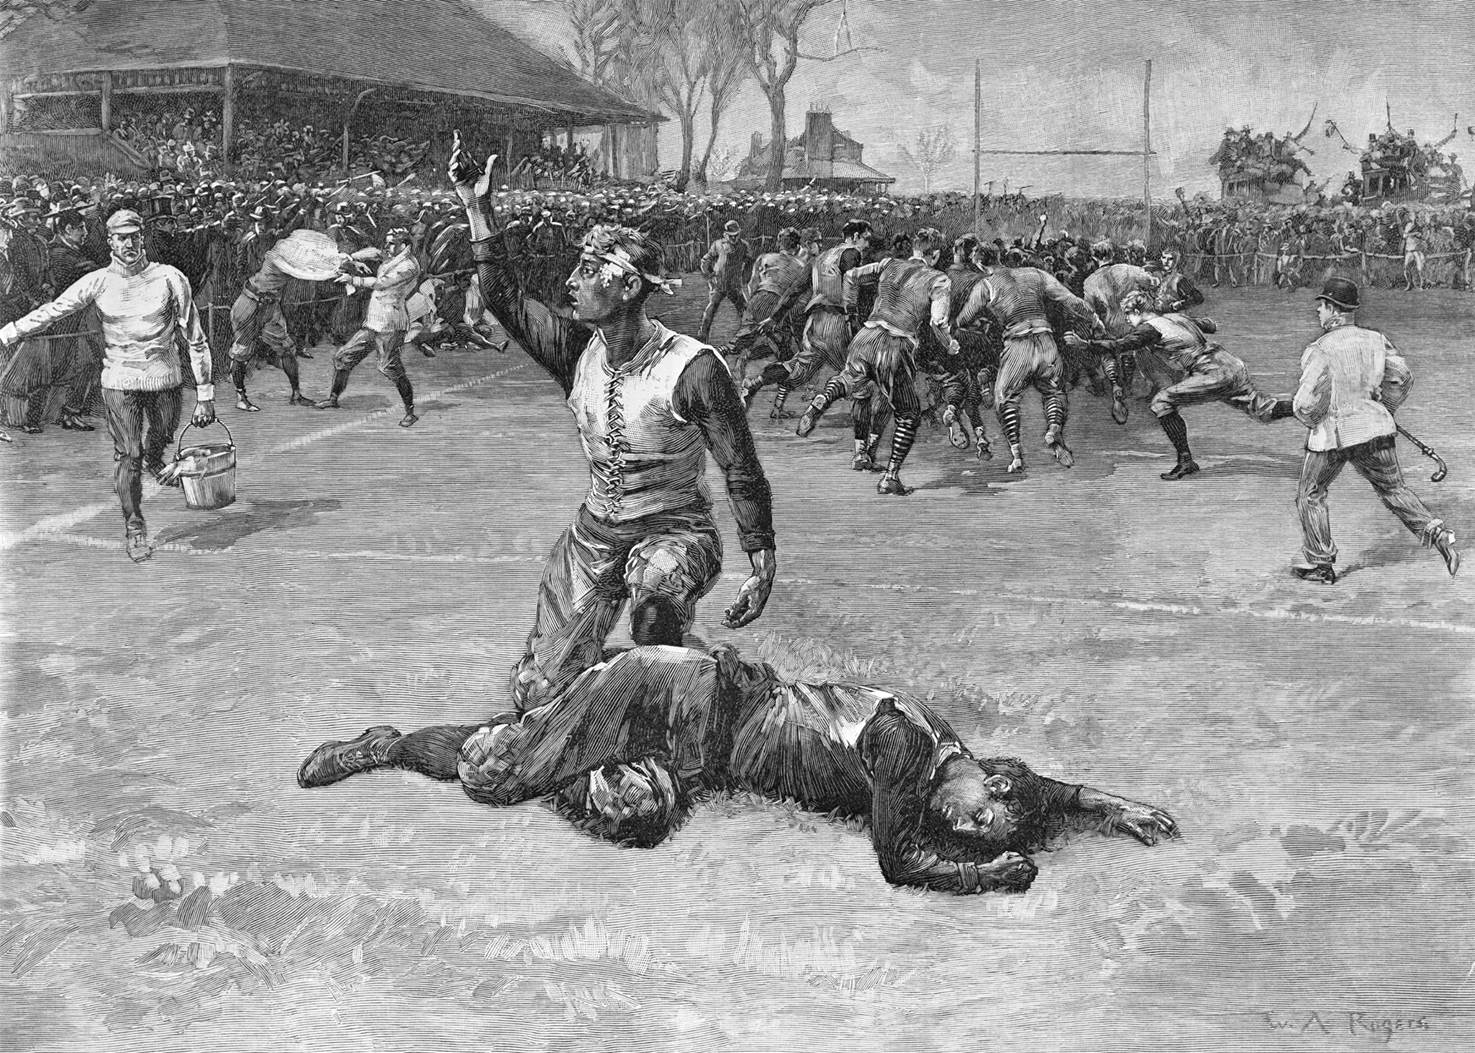 W. A. Rogers’s engraving, “Out of the Game,” showed one injured boy tending to another. It appeared 